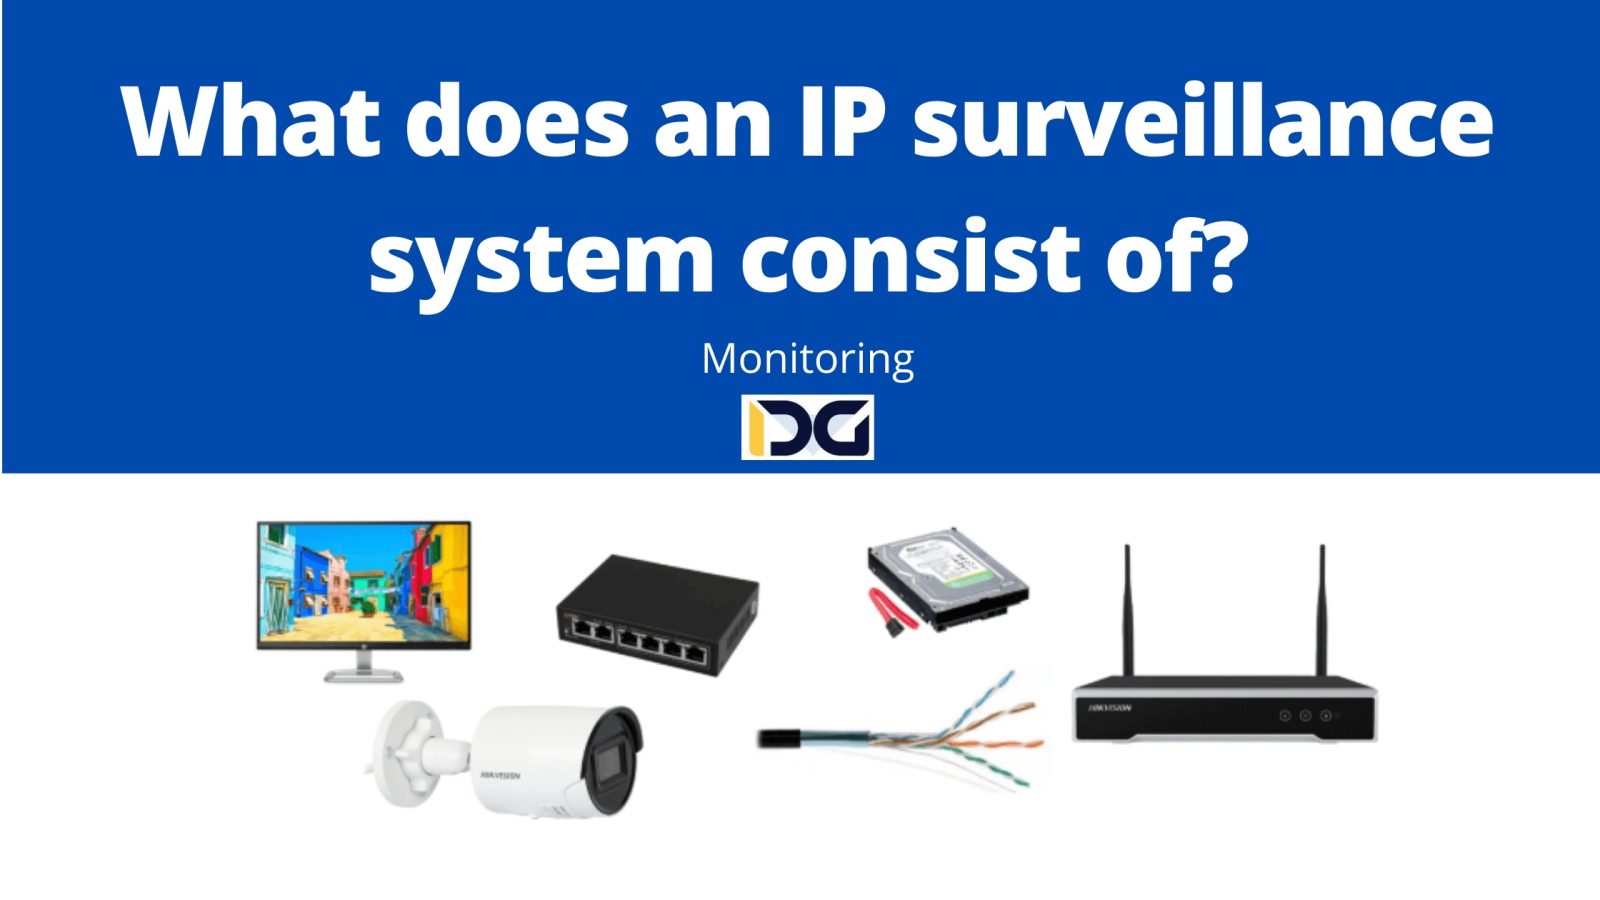 What does an IP surveillance system consist of?